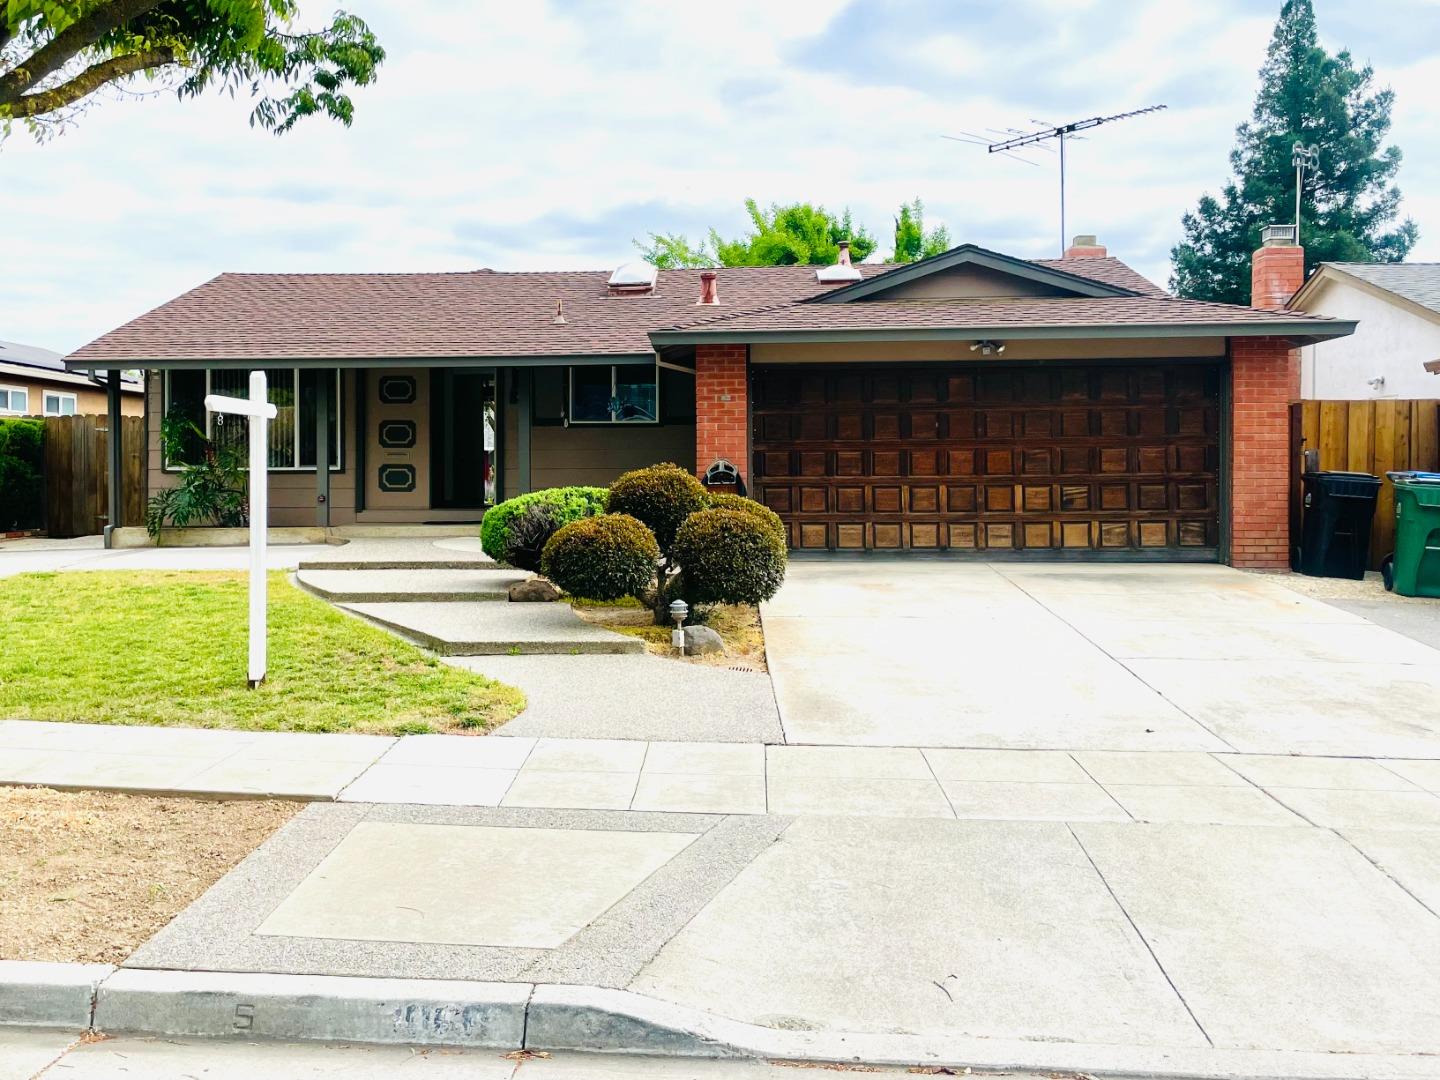 Photo of 3066 Lynview Dr in San Jose, CA